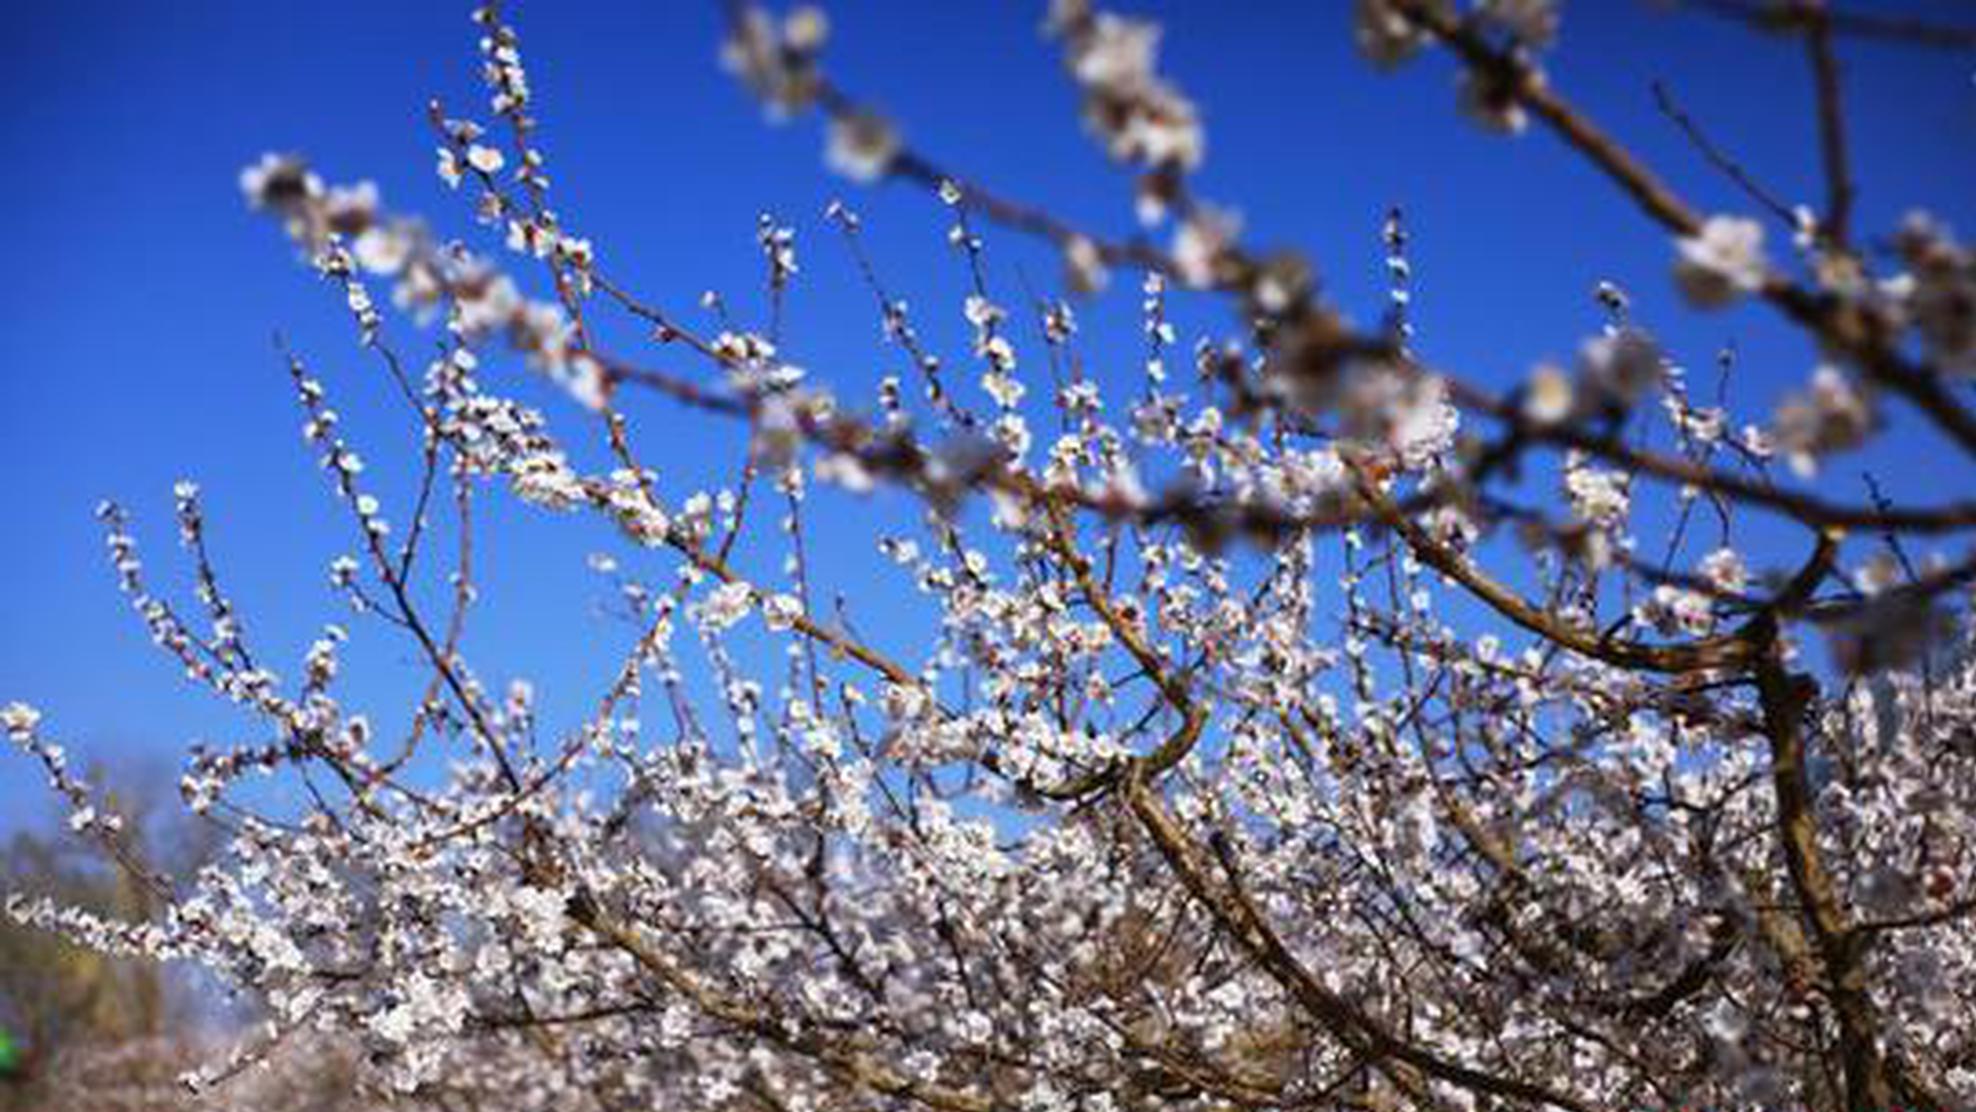 Spring flowers boost tourism in Xinjiang